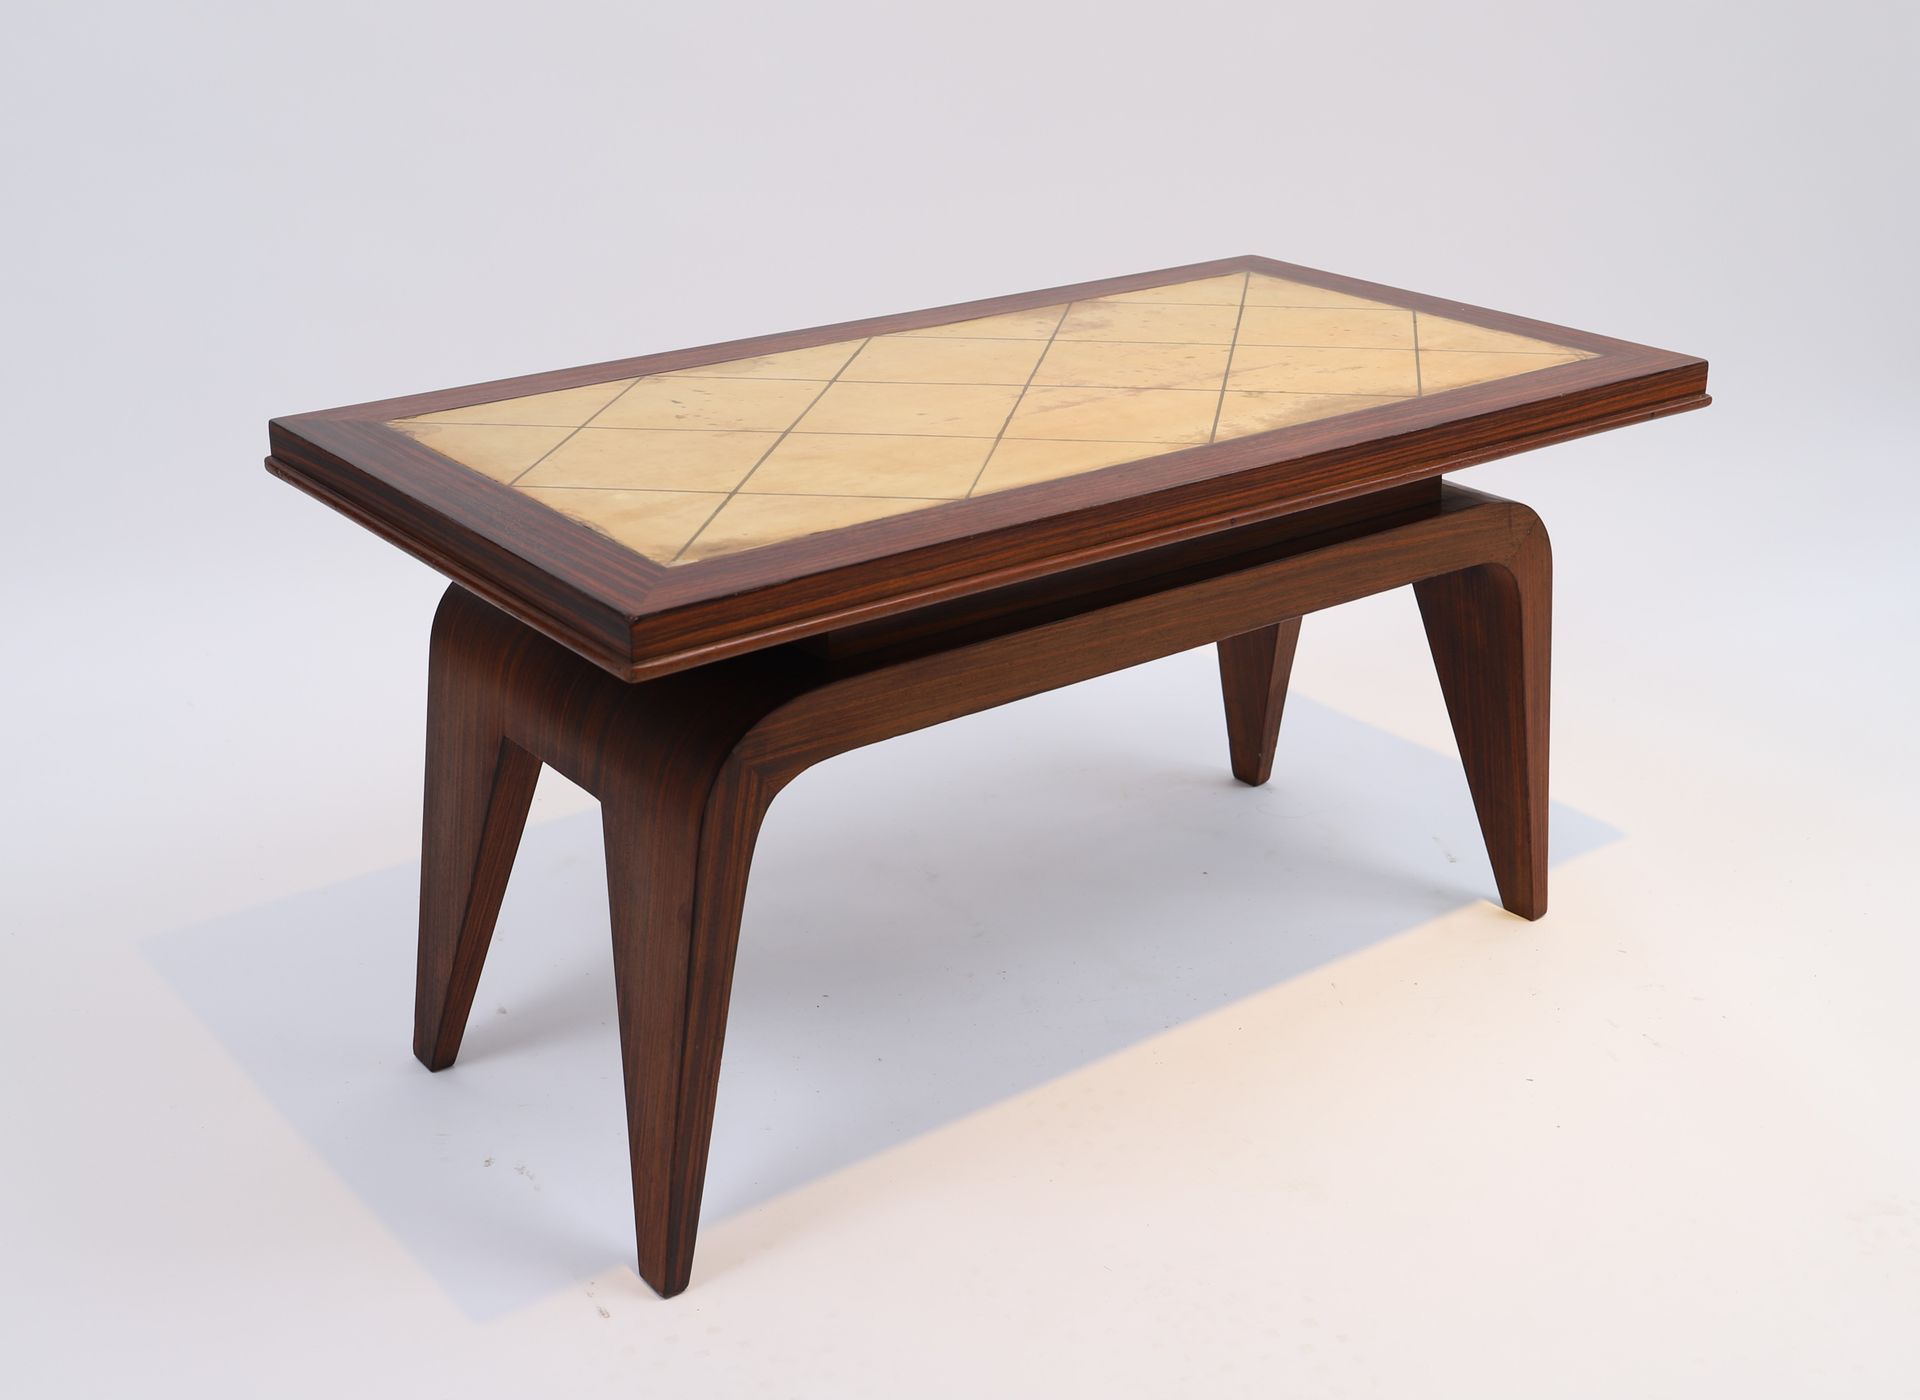 Null Coffee table by Christian Krass (1868-1957) - Lyon

In rosewood resting on &hellip;